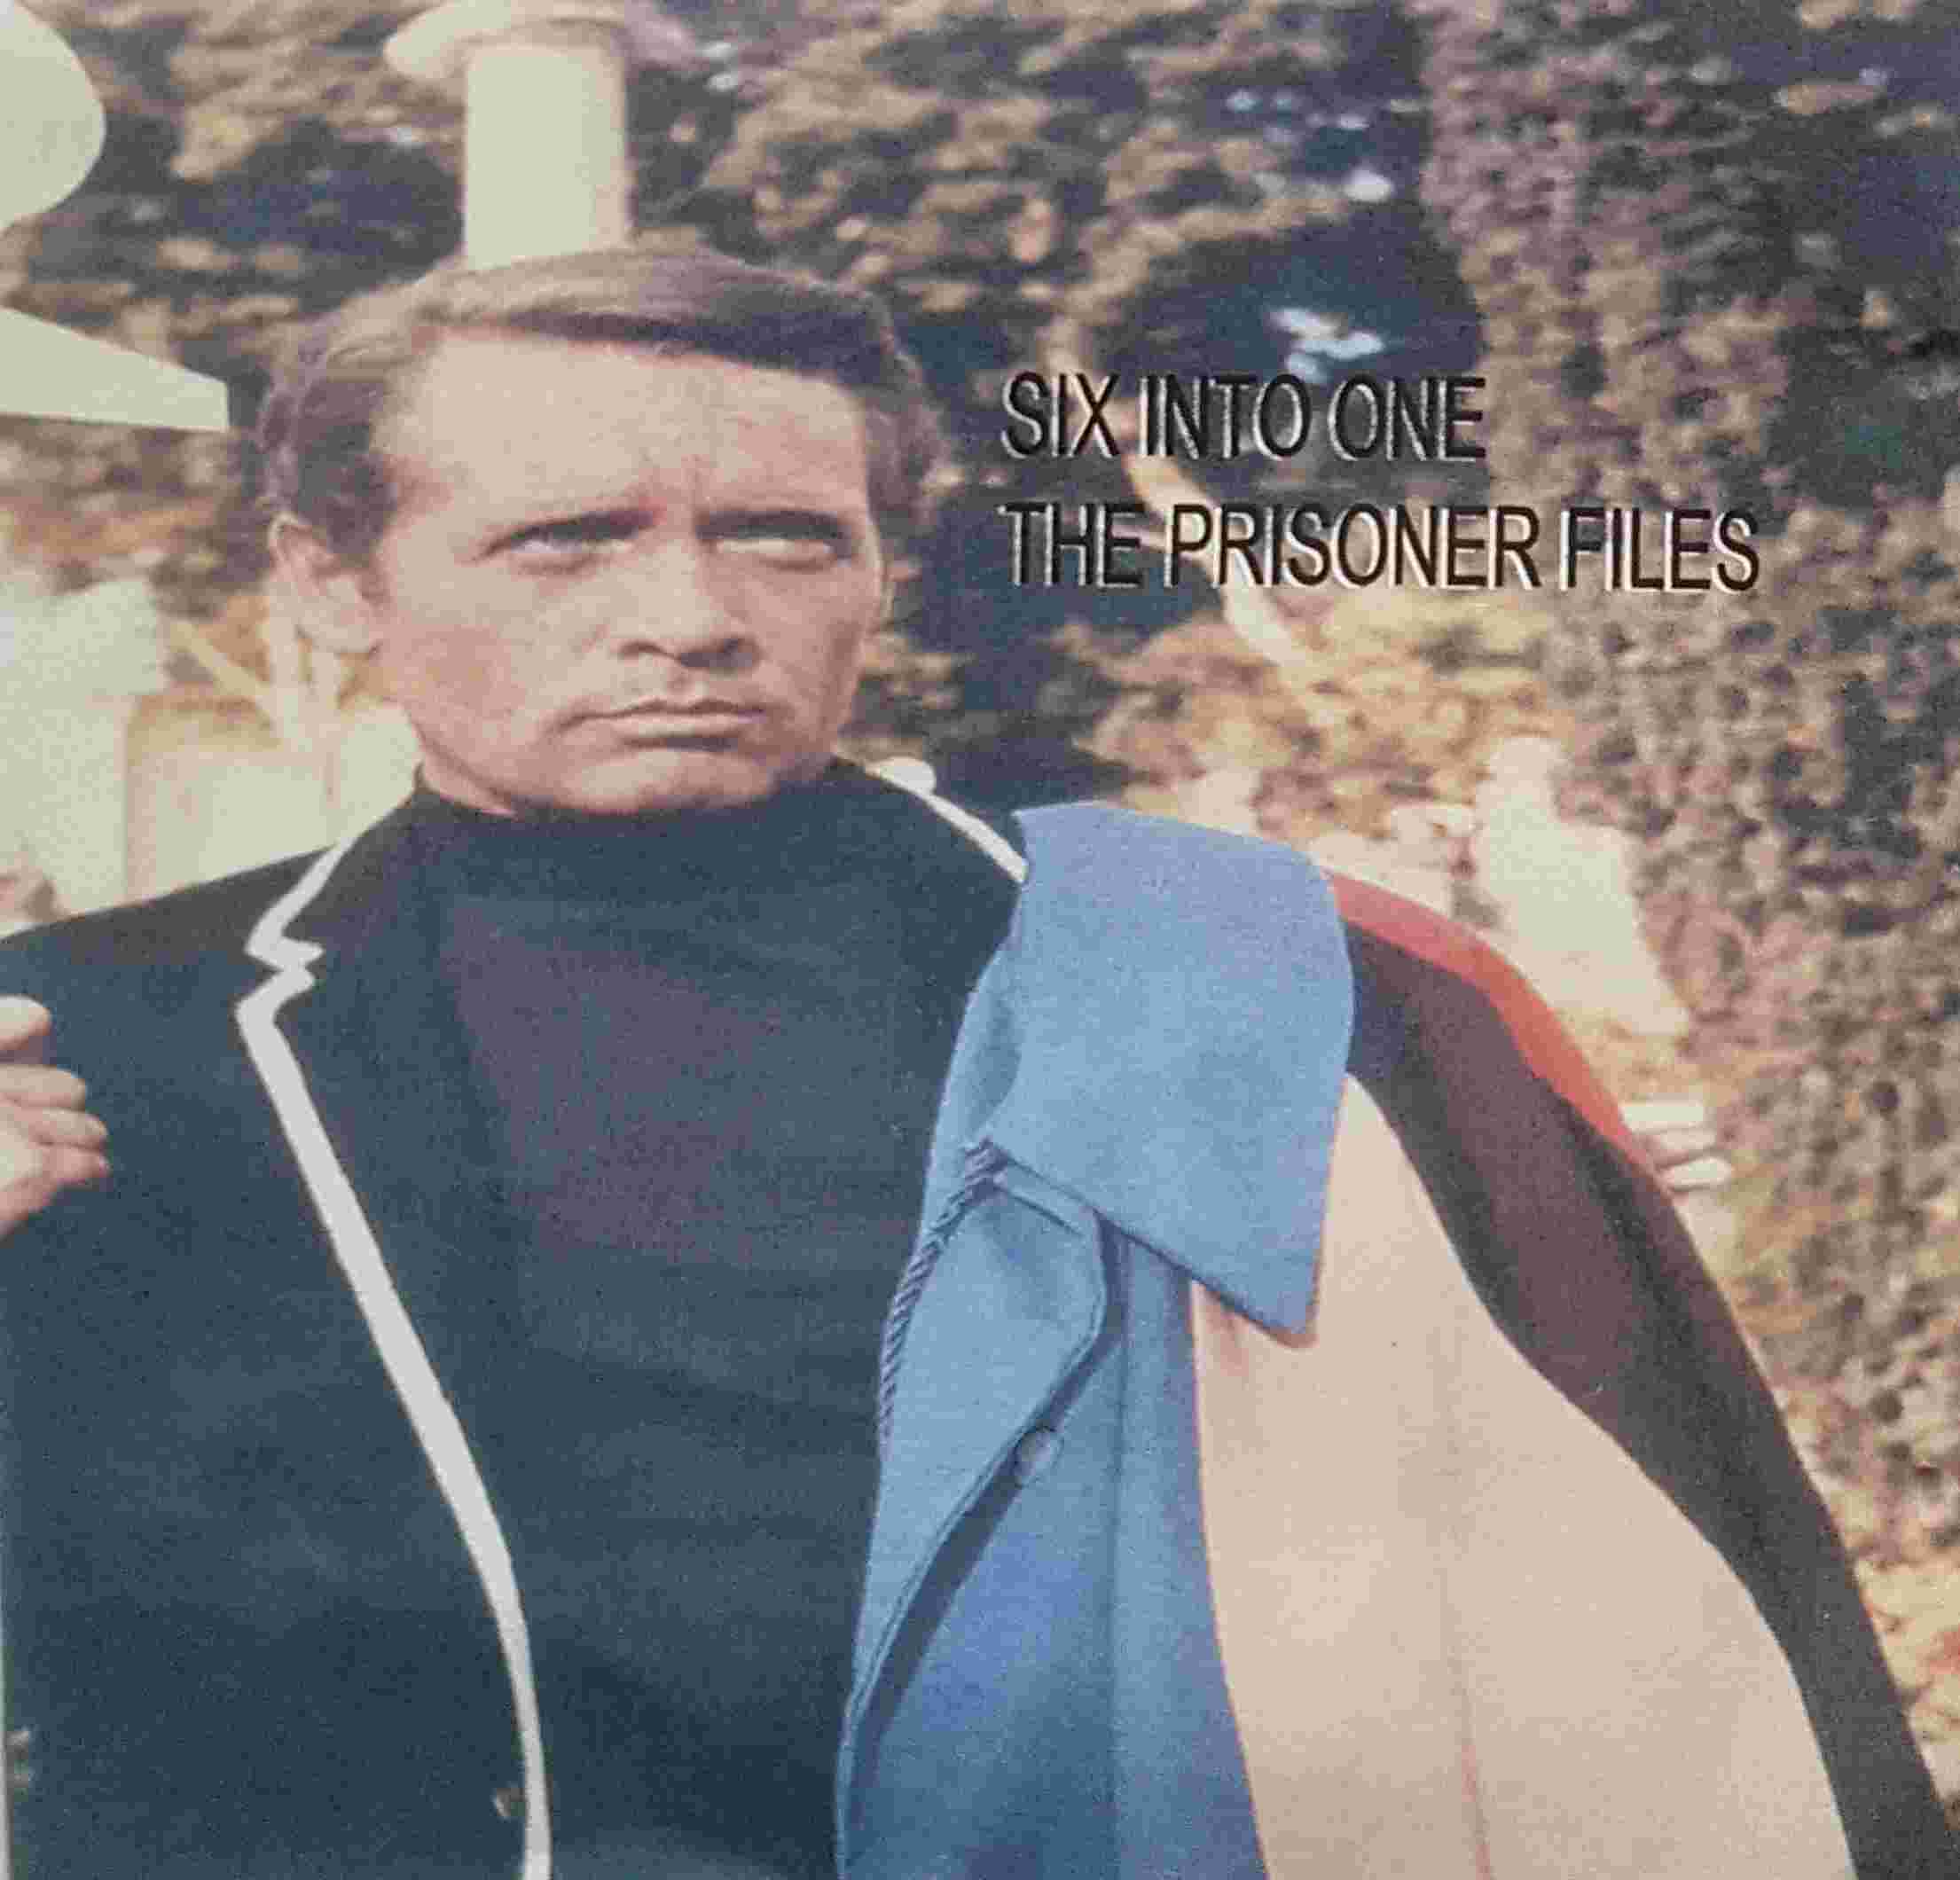 Picture of DVD-SIO-TPF Six into one - The Prisoner files by artist Laurens C. Postma / Chris Rodley from ITV, Channel 4 and Channel 5 dvds library